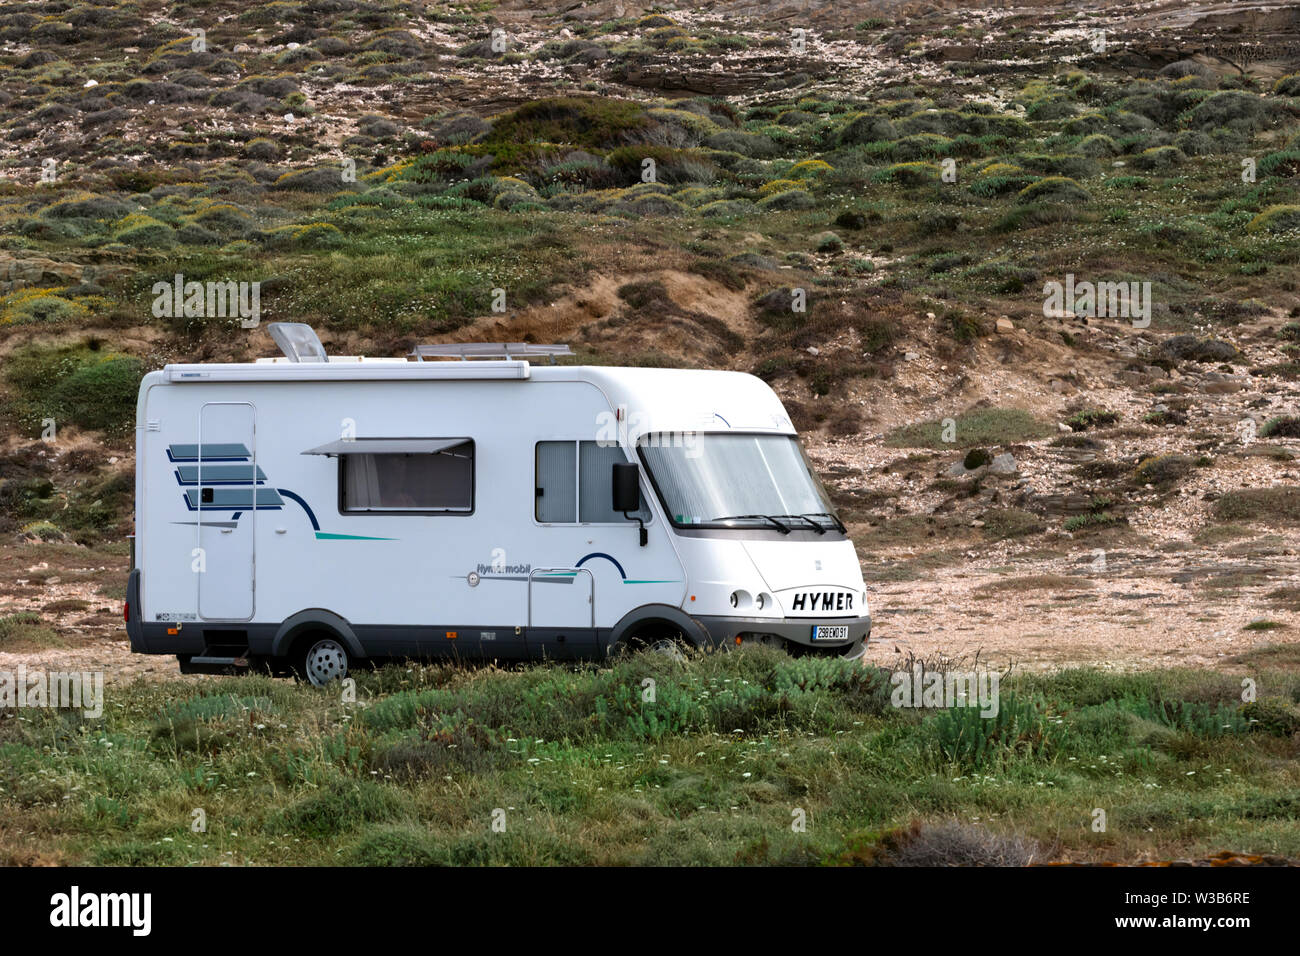 Tharros, Sardinia, Italy - June 11, 2019: A white camper motor home is parking on a mountain road, passengers gone hiking. Stock Photo